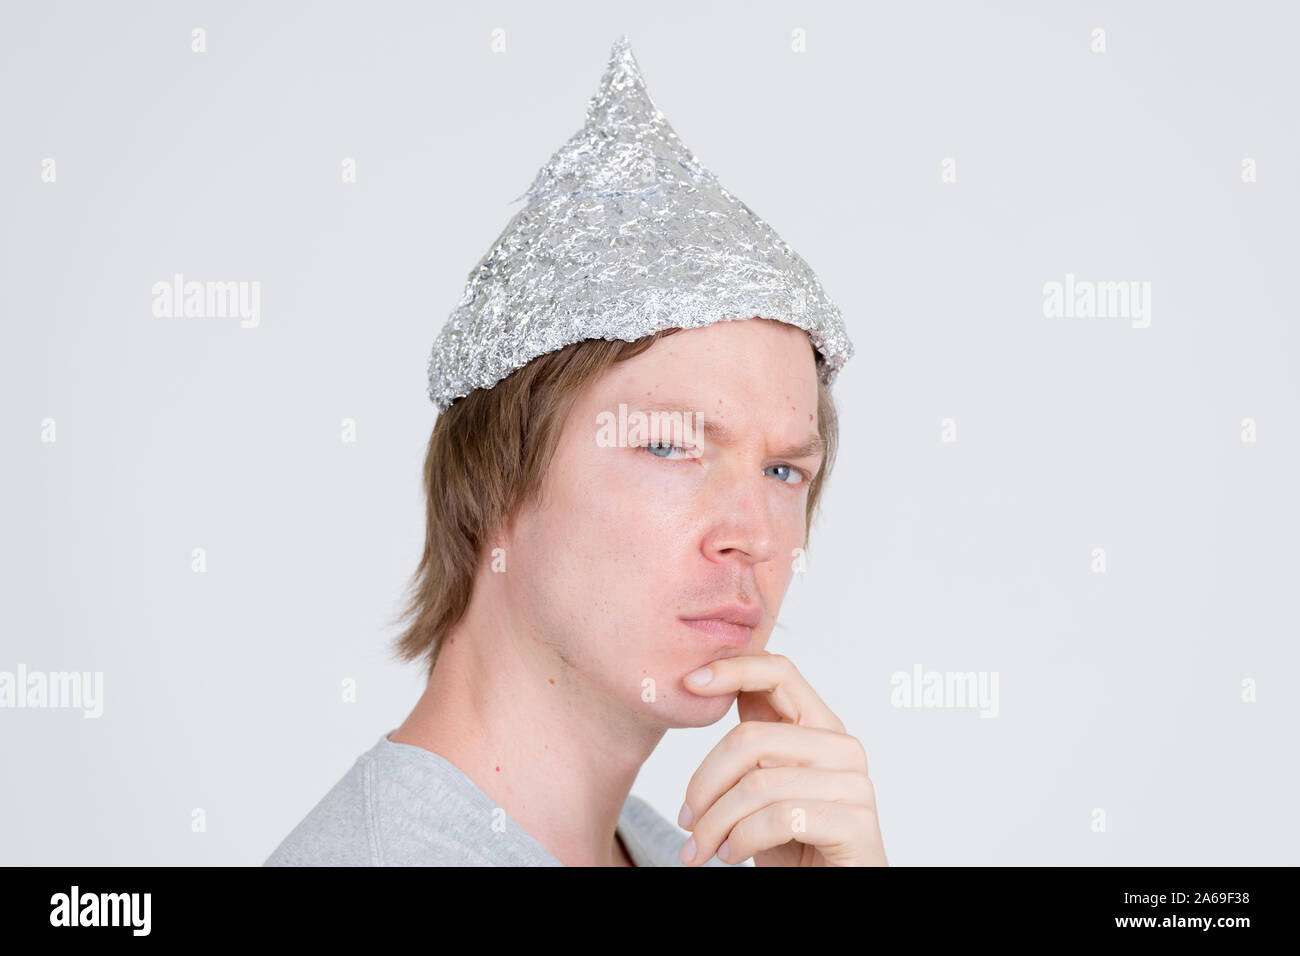 Closeup profile view of young man with tinfoil hat thinking and looking at camera Stock Photo